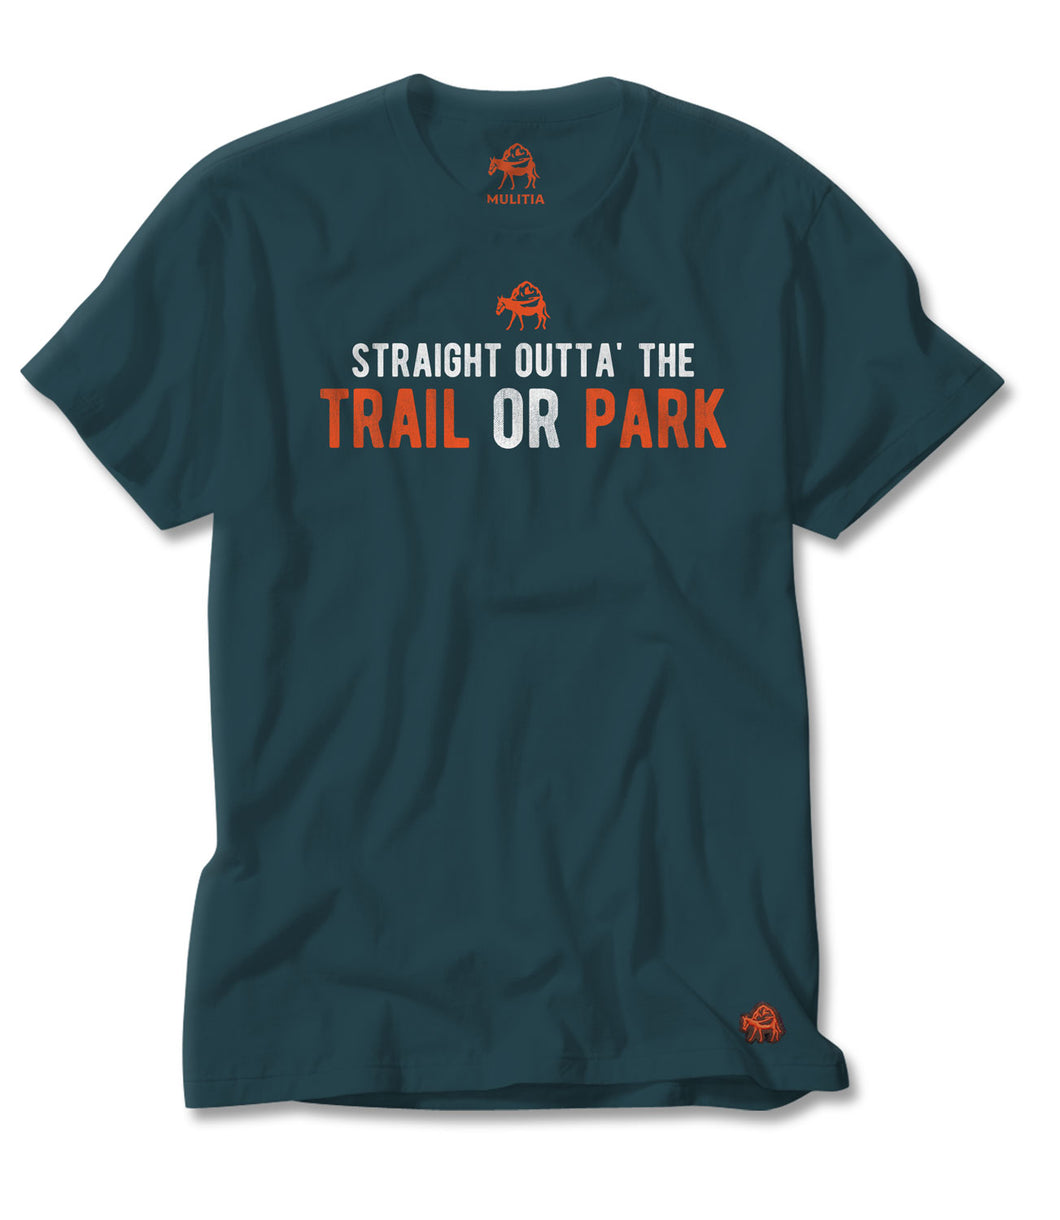 Trail or Park Tee in Teal